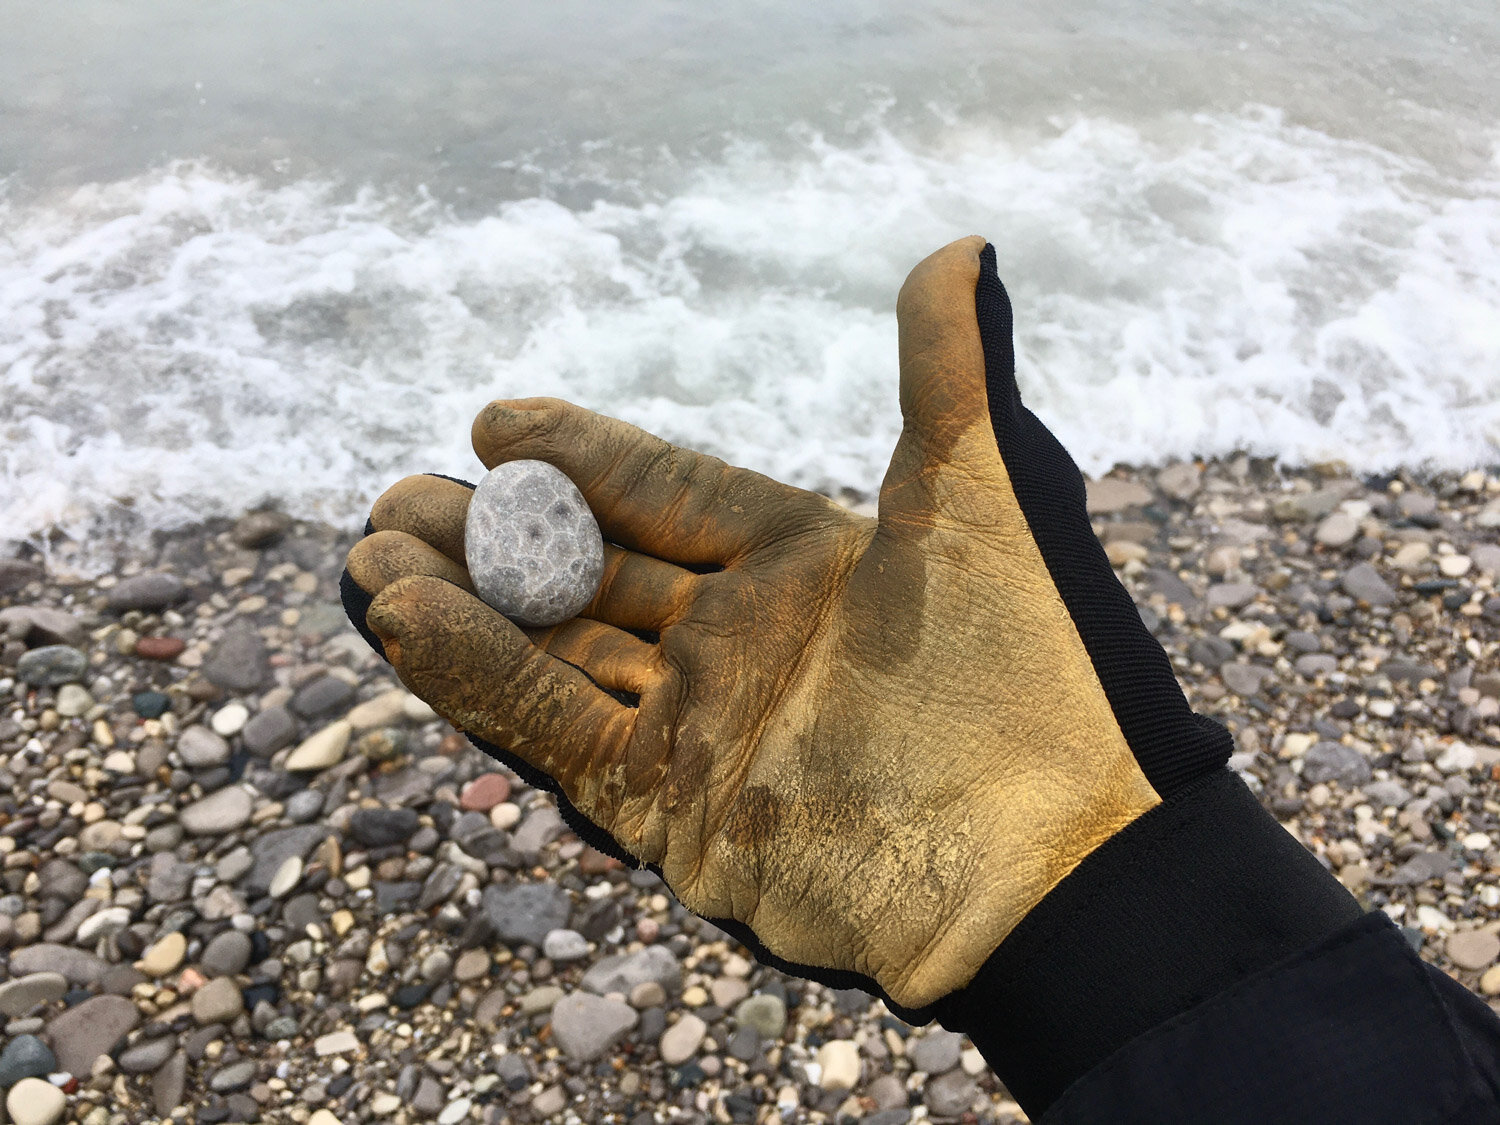 Rock & Fossil Hunting in Southwest Michigan